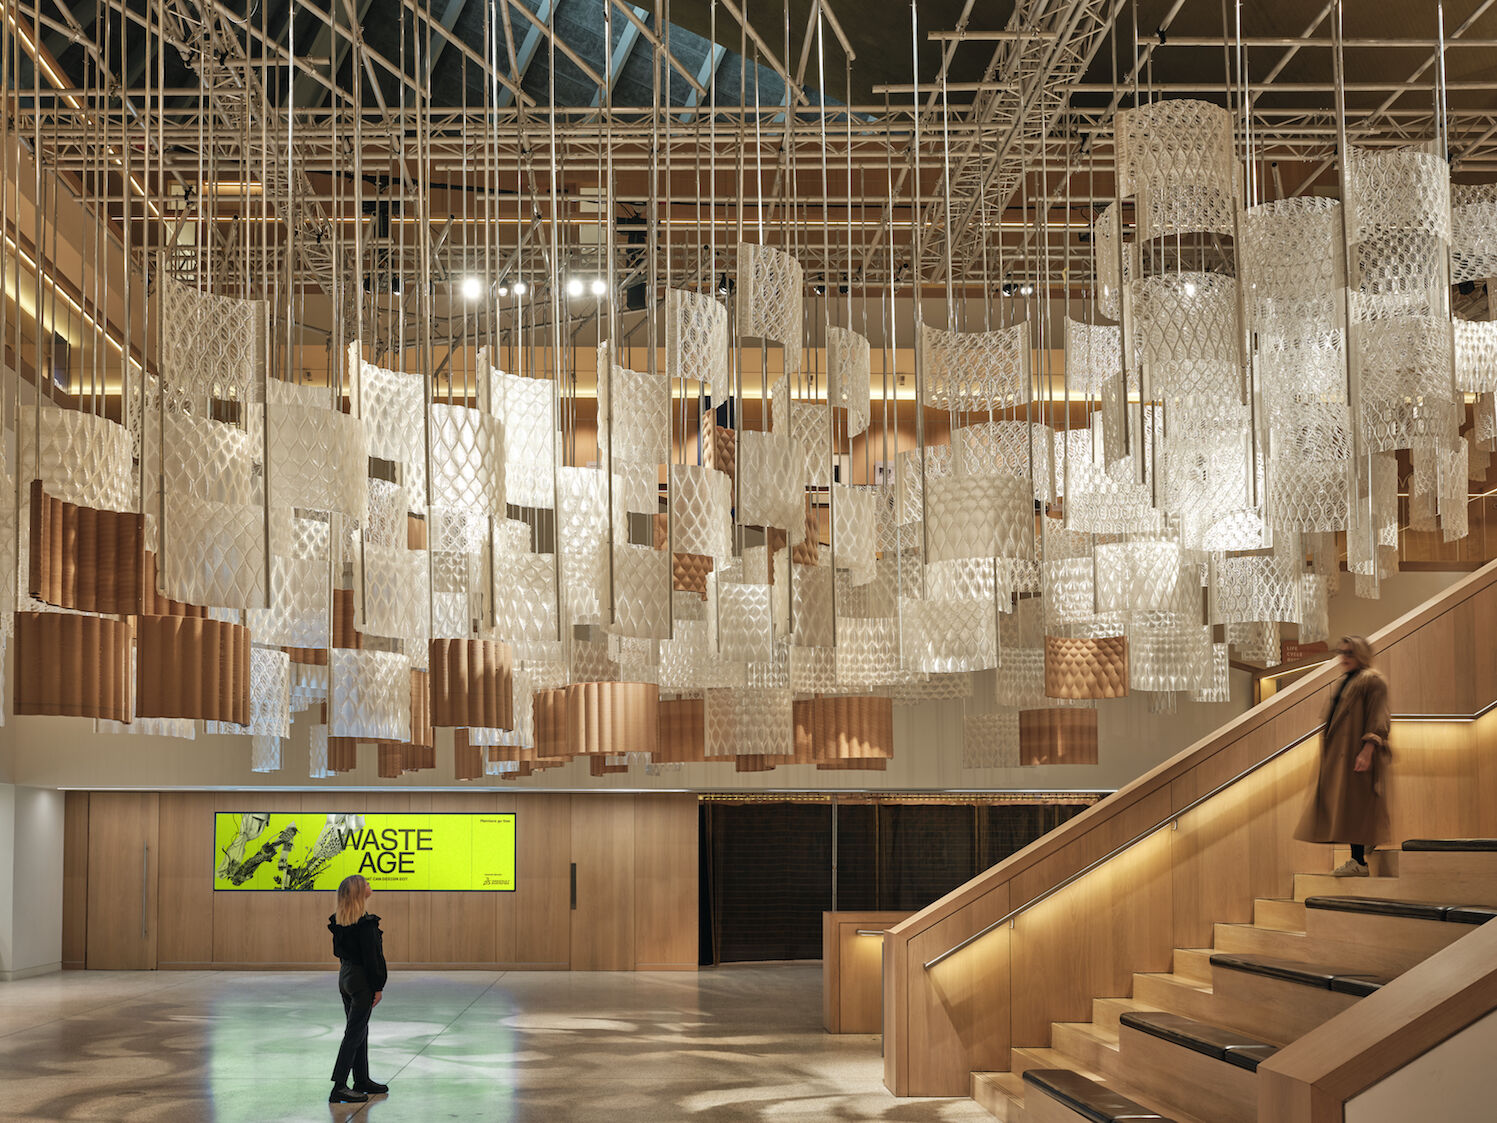 Dassault Systèmes unveils its next “Design for Life” installation at the Design Museum in London